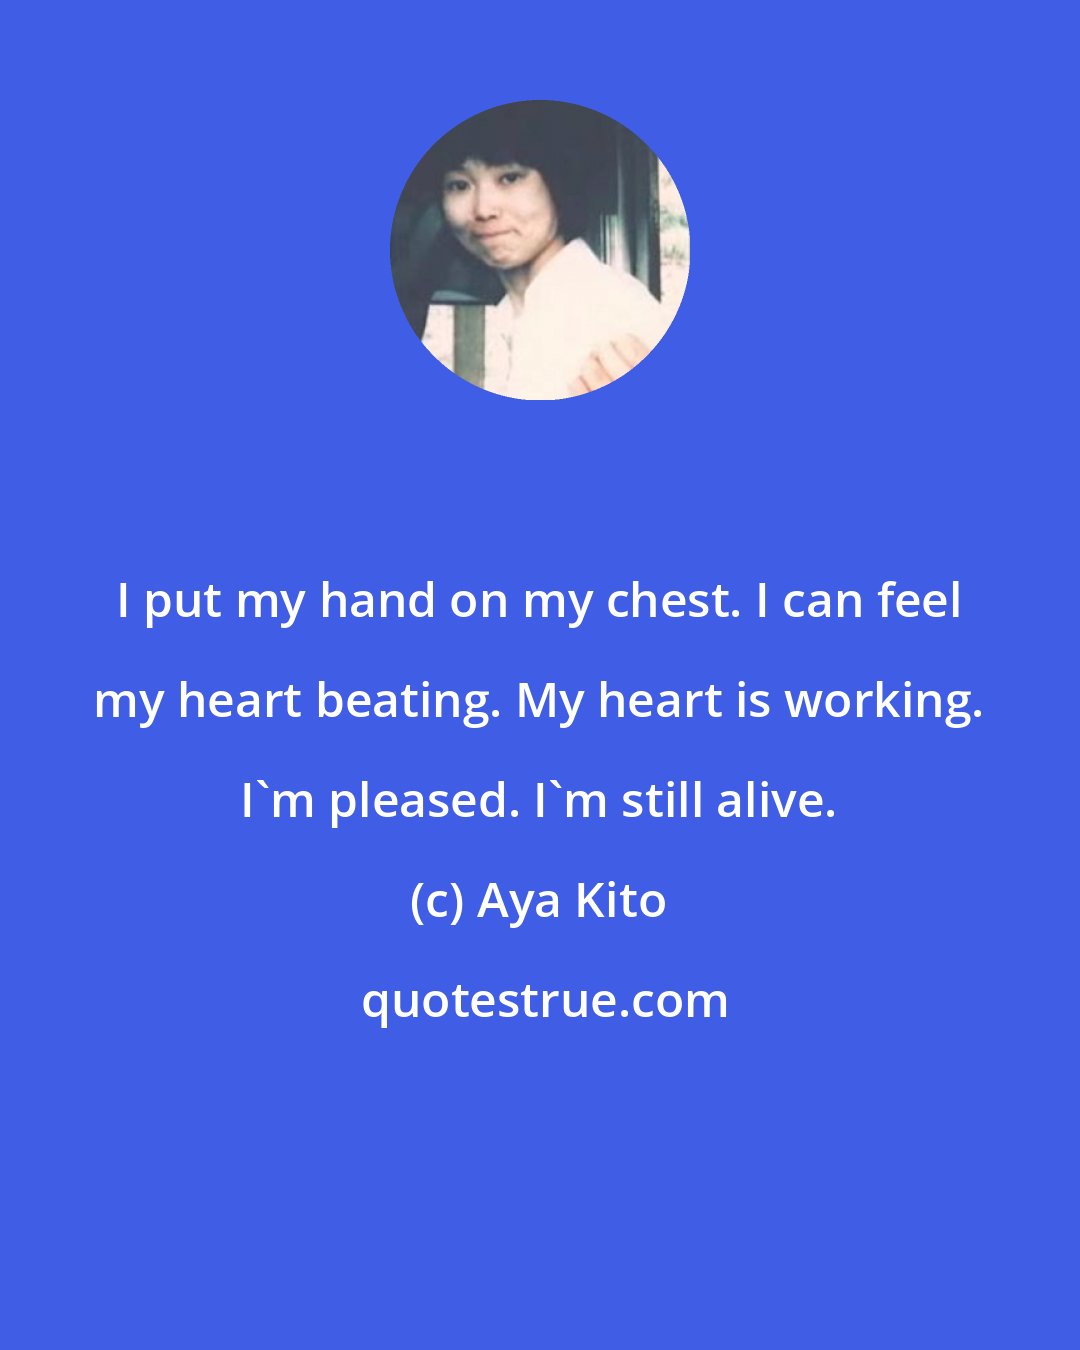 Aya Kito: I put my hand on my chest. I can feel my heart beating. My heart is working. I'm pleased. I'm still alive.